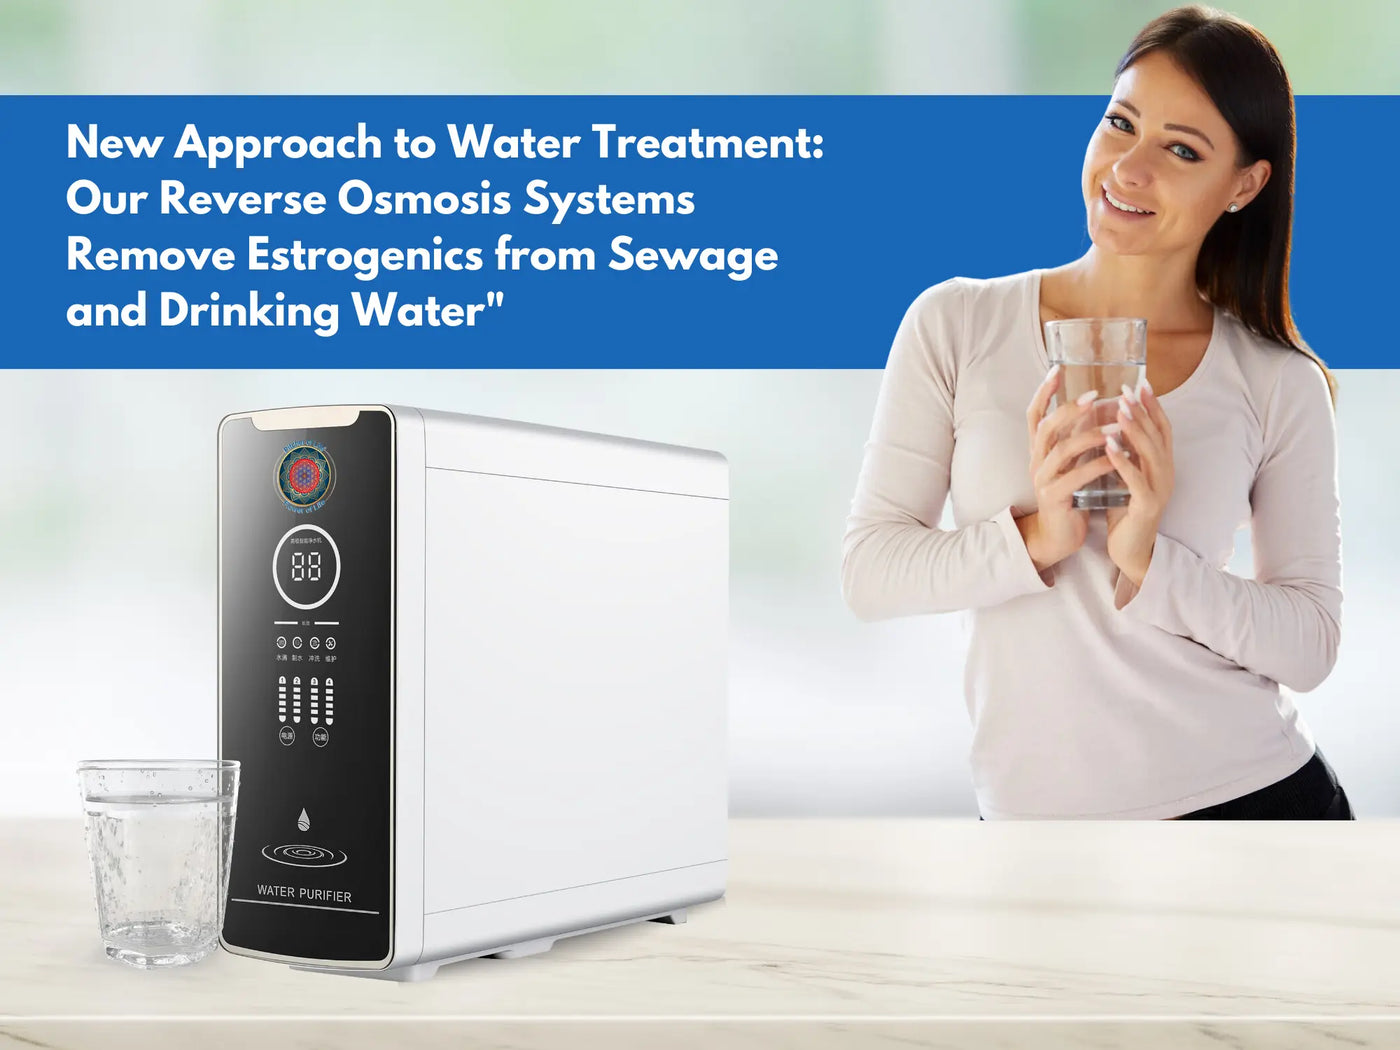 New Approach to Water Treatment: Our Reverse Osmosis Systems Remove Estrogenics from Sewage and Drinking Water